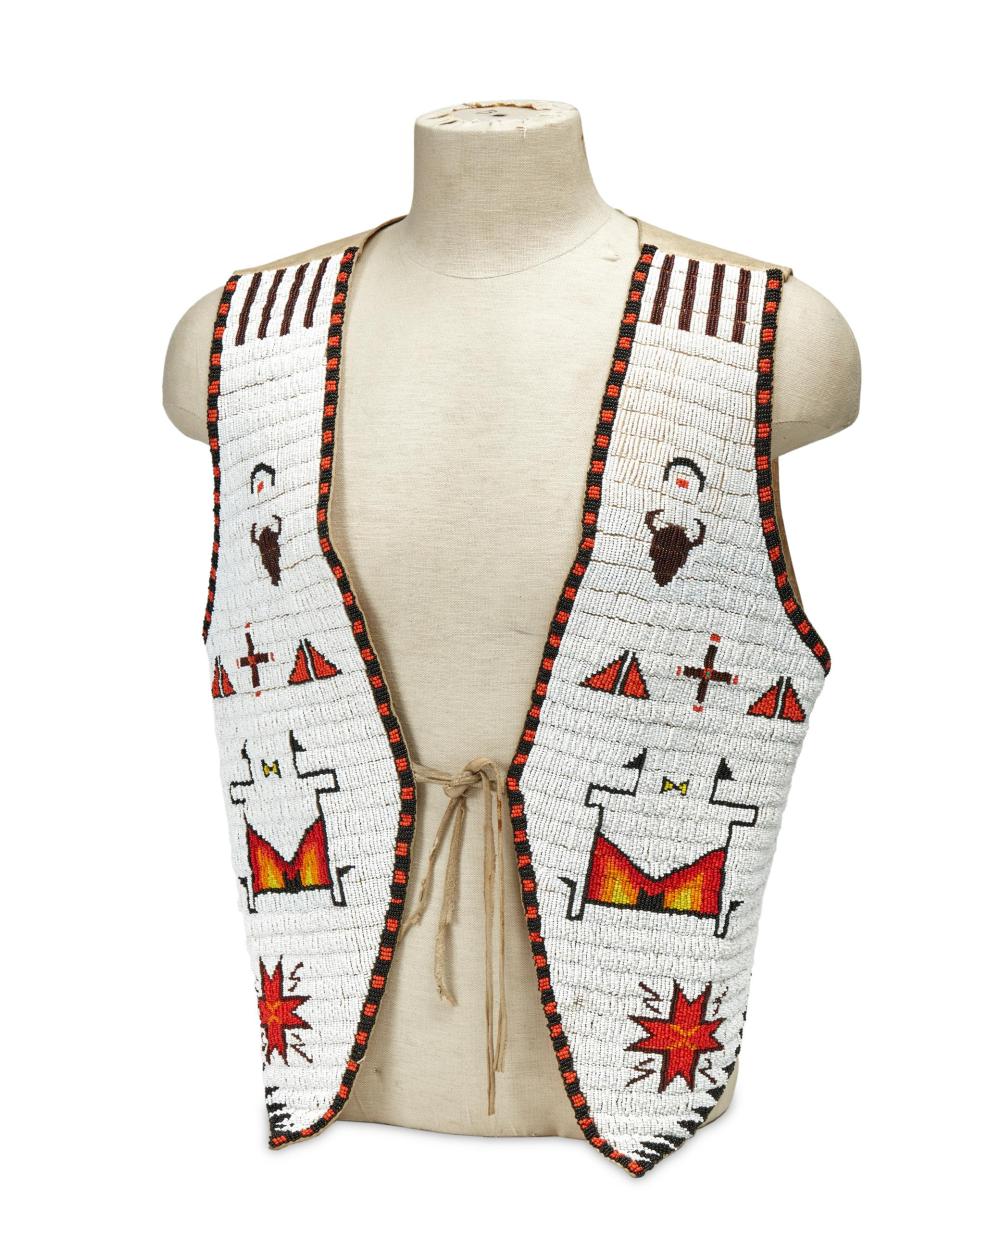 A SIOUX BEADED HIDE VEST BY ARCHIE 3446b4